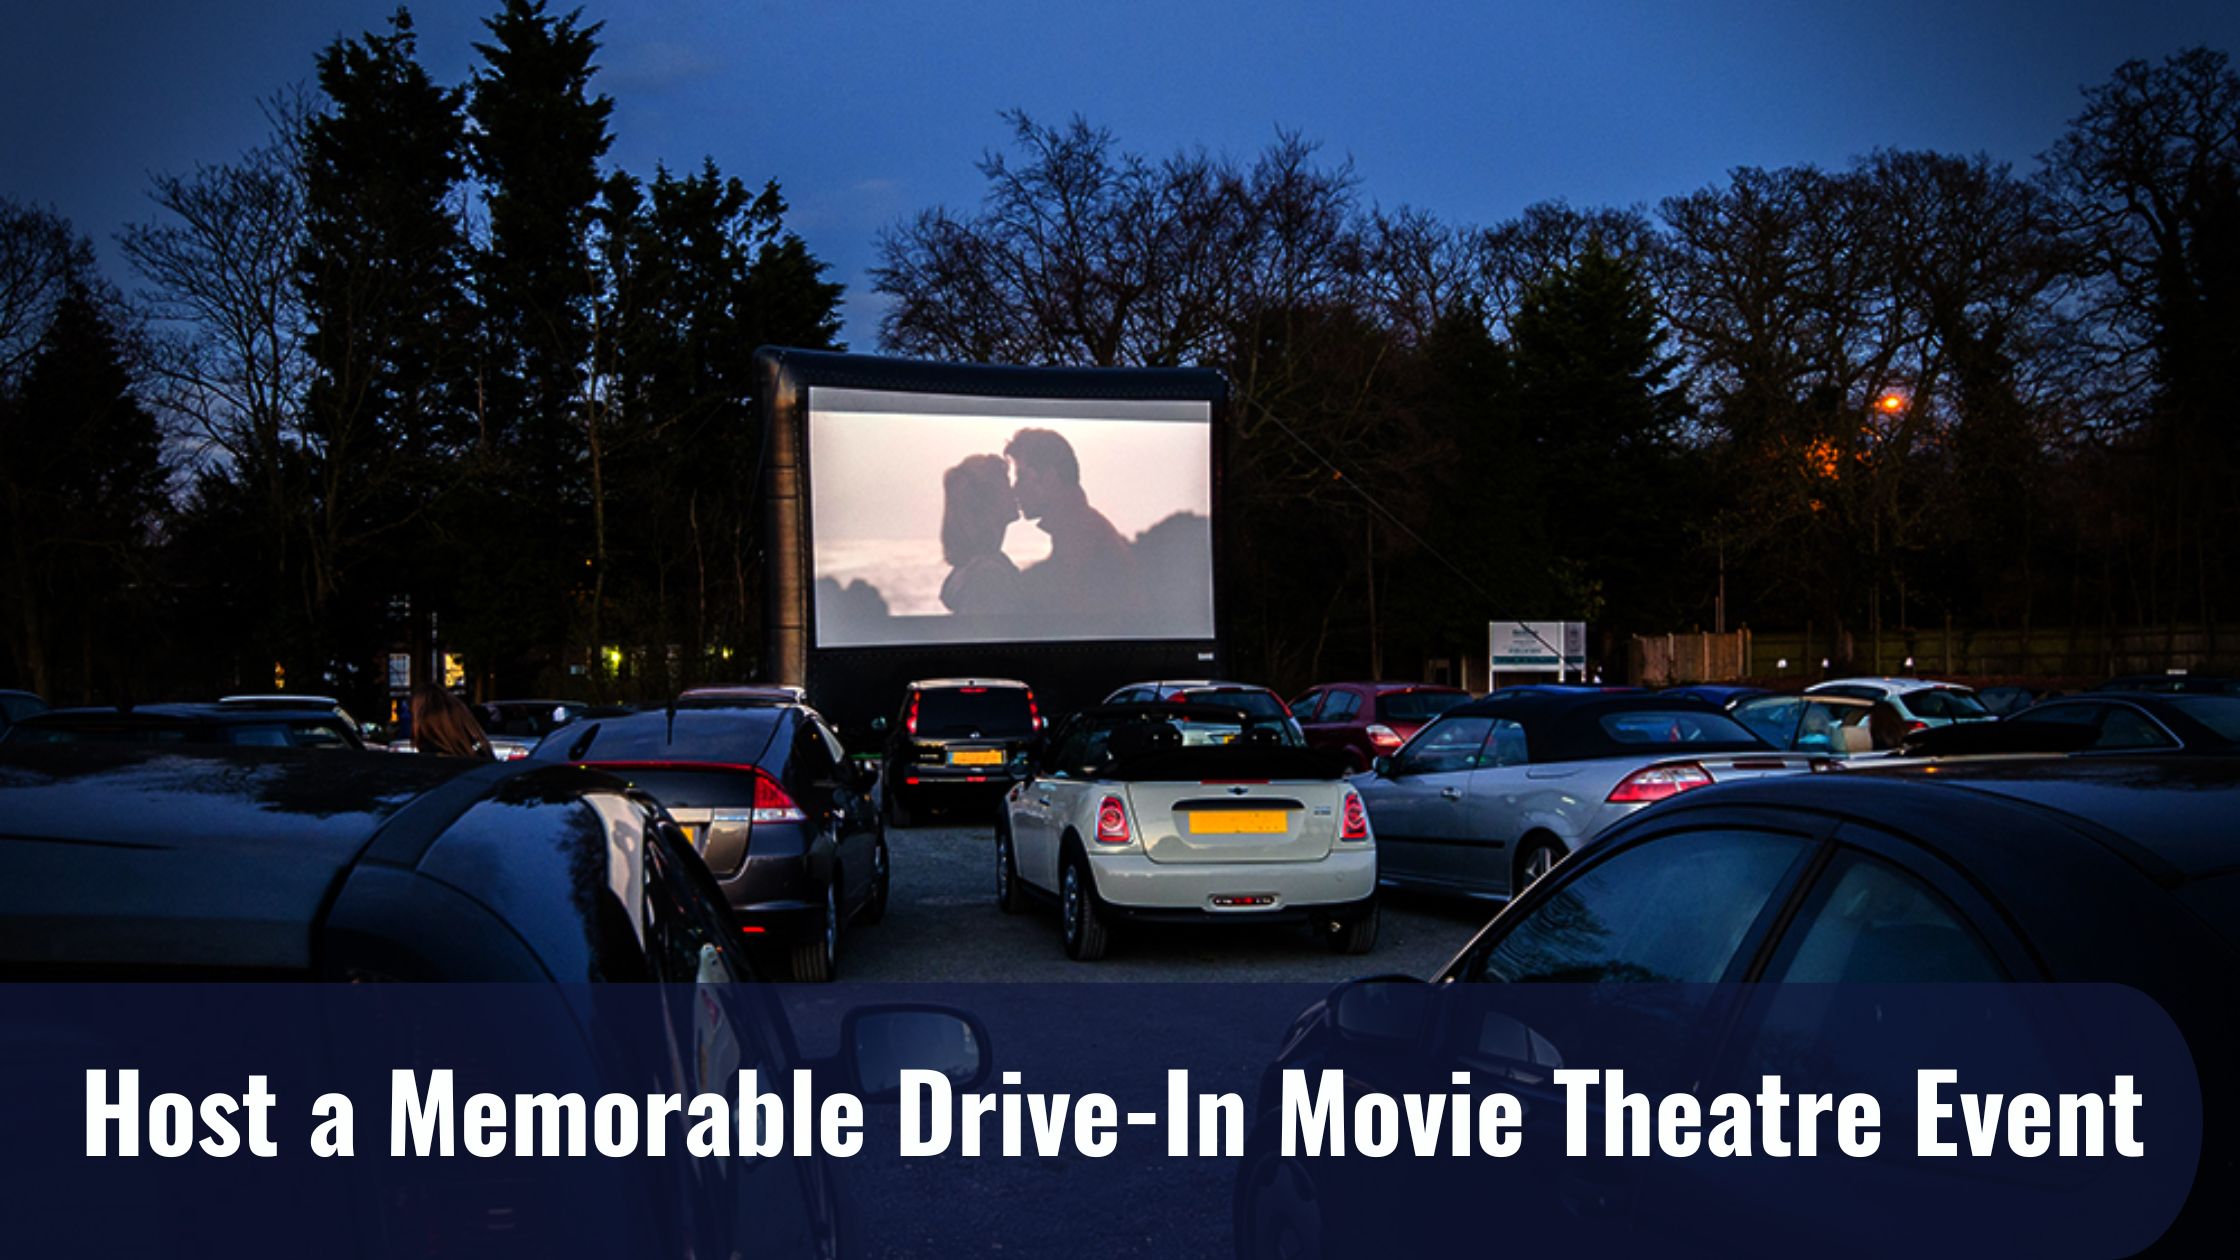 Host a Memorable Drive-In Movie Theatre Event in 10 Simple Steps